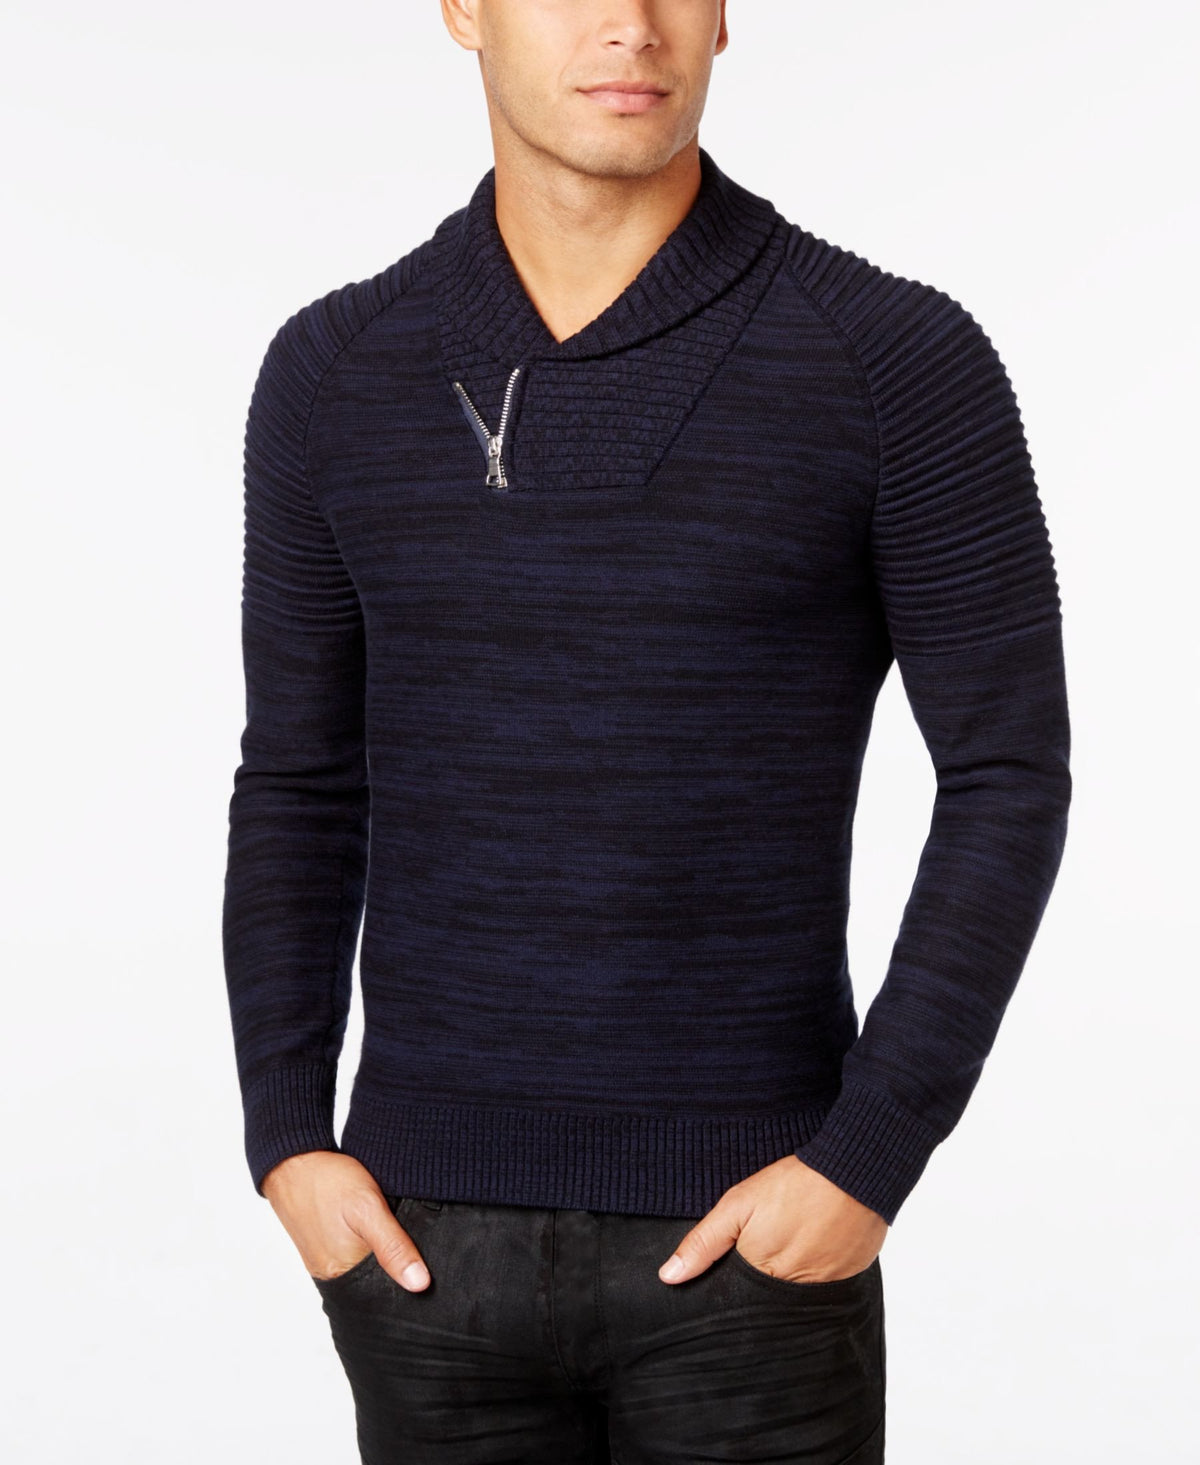 INC International Concepts Navy-Blue Nickelby Marled Shawl-Collar Sweater